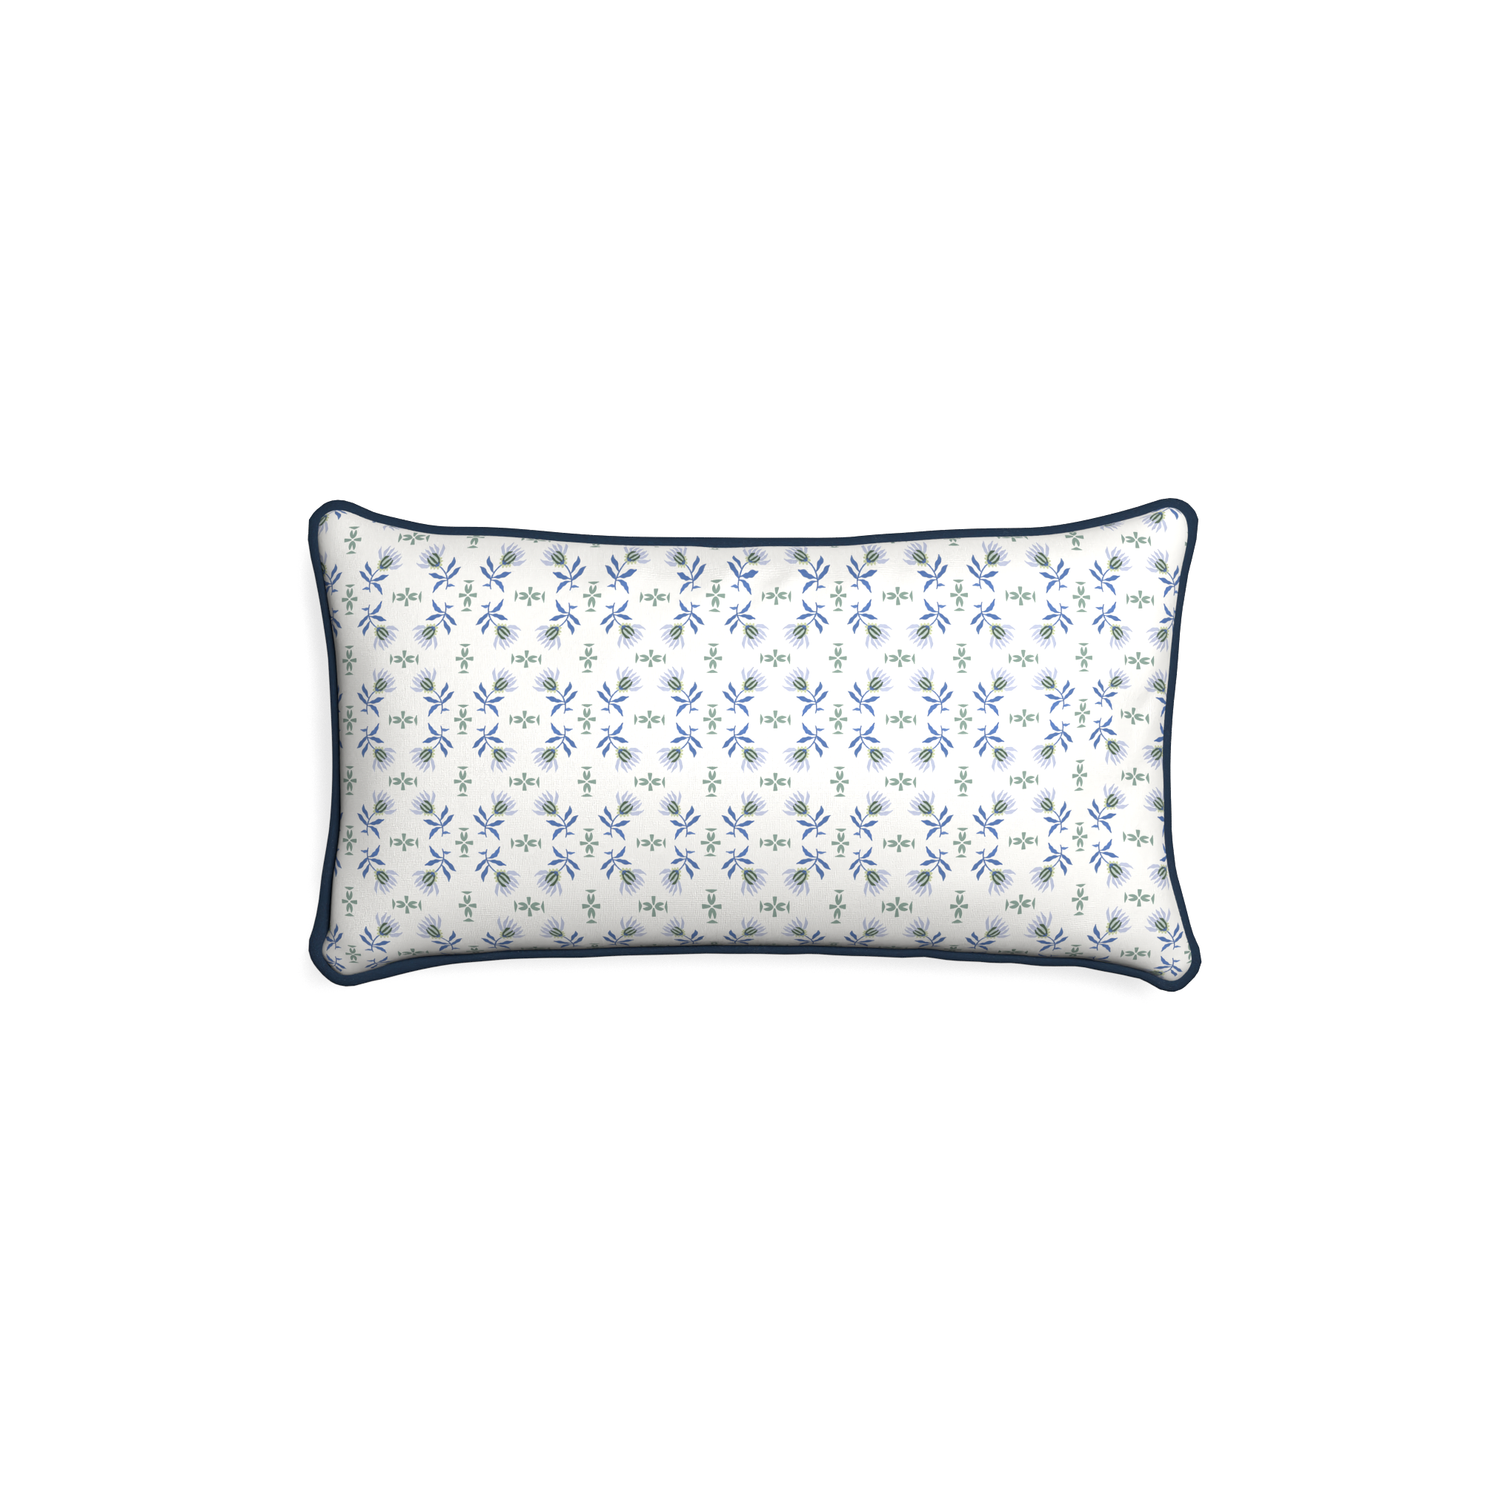 Petite-lumbar lee custom blue & green floralpillow with c piping on white background